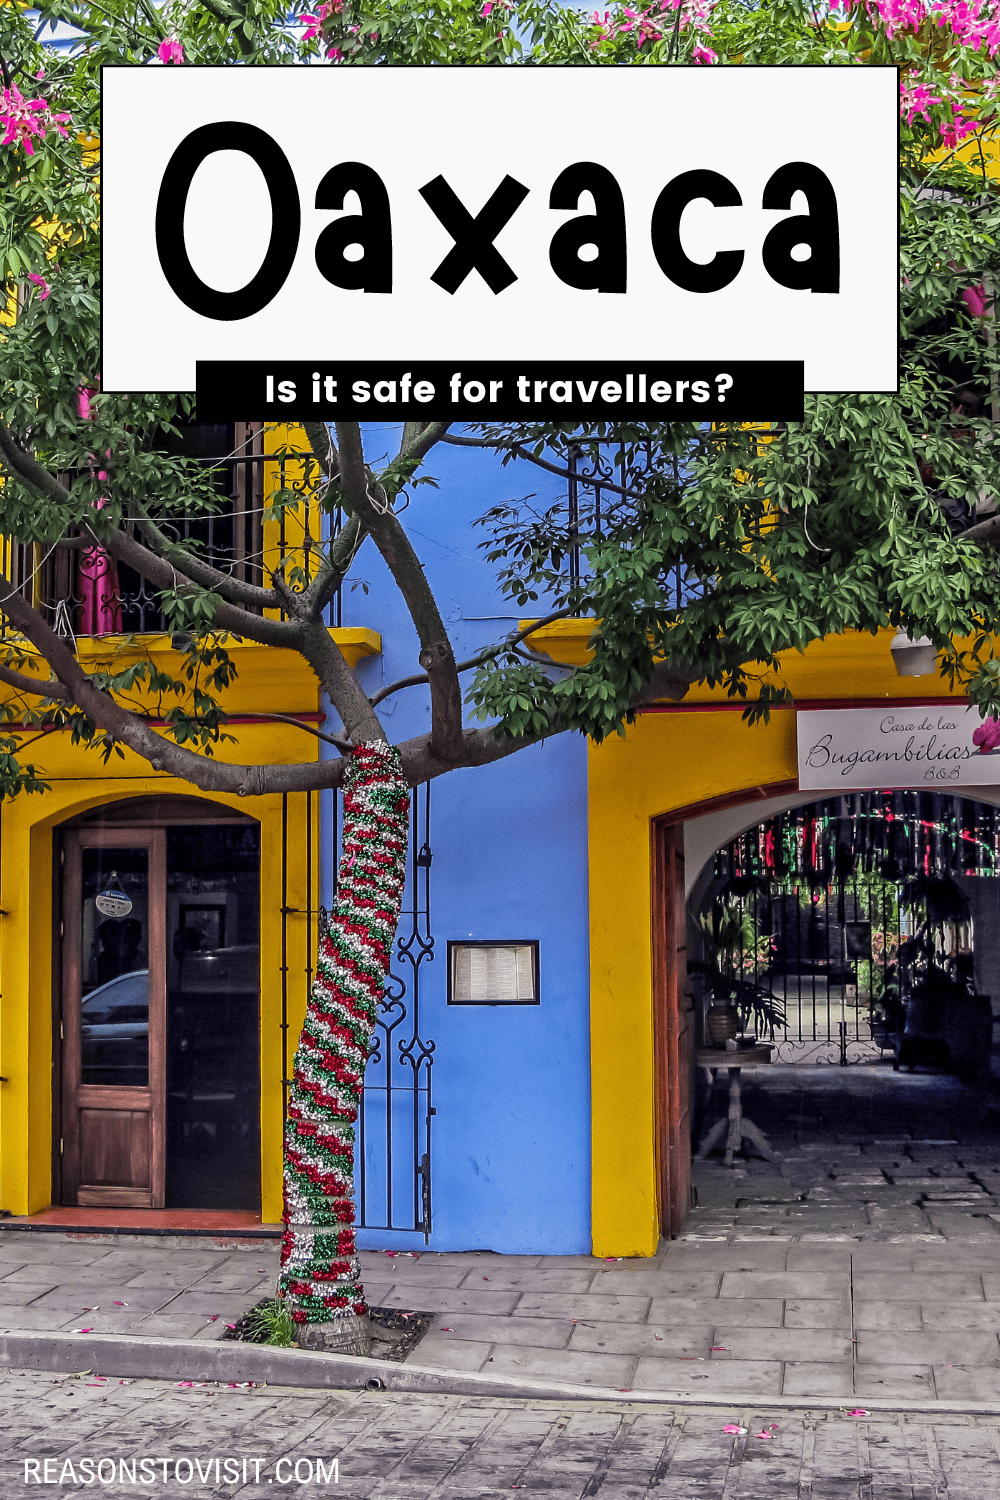 Concerned about safety in Oaxaca, Mexico? This guide covers key safety aspects, local advice, and practical tips to ensure you have a safe and enjoyable visit to this beautiful city.